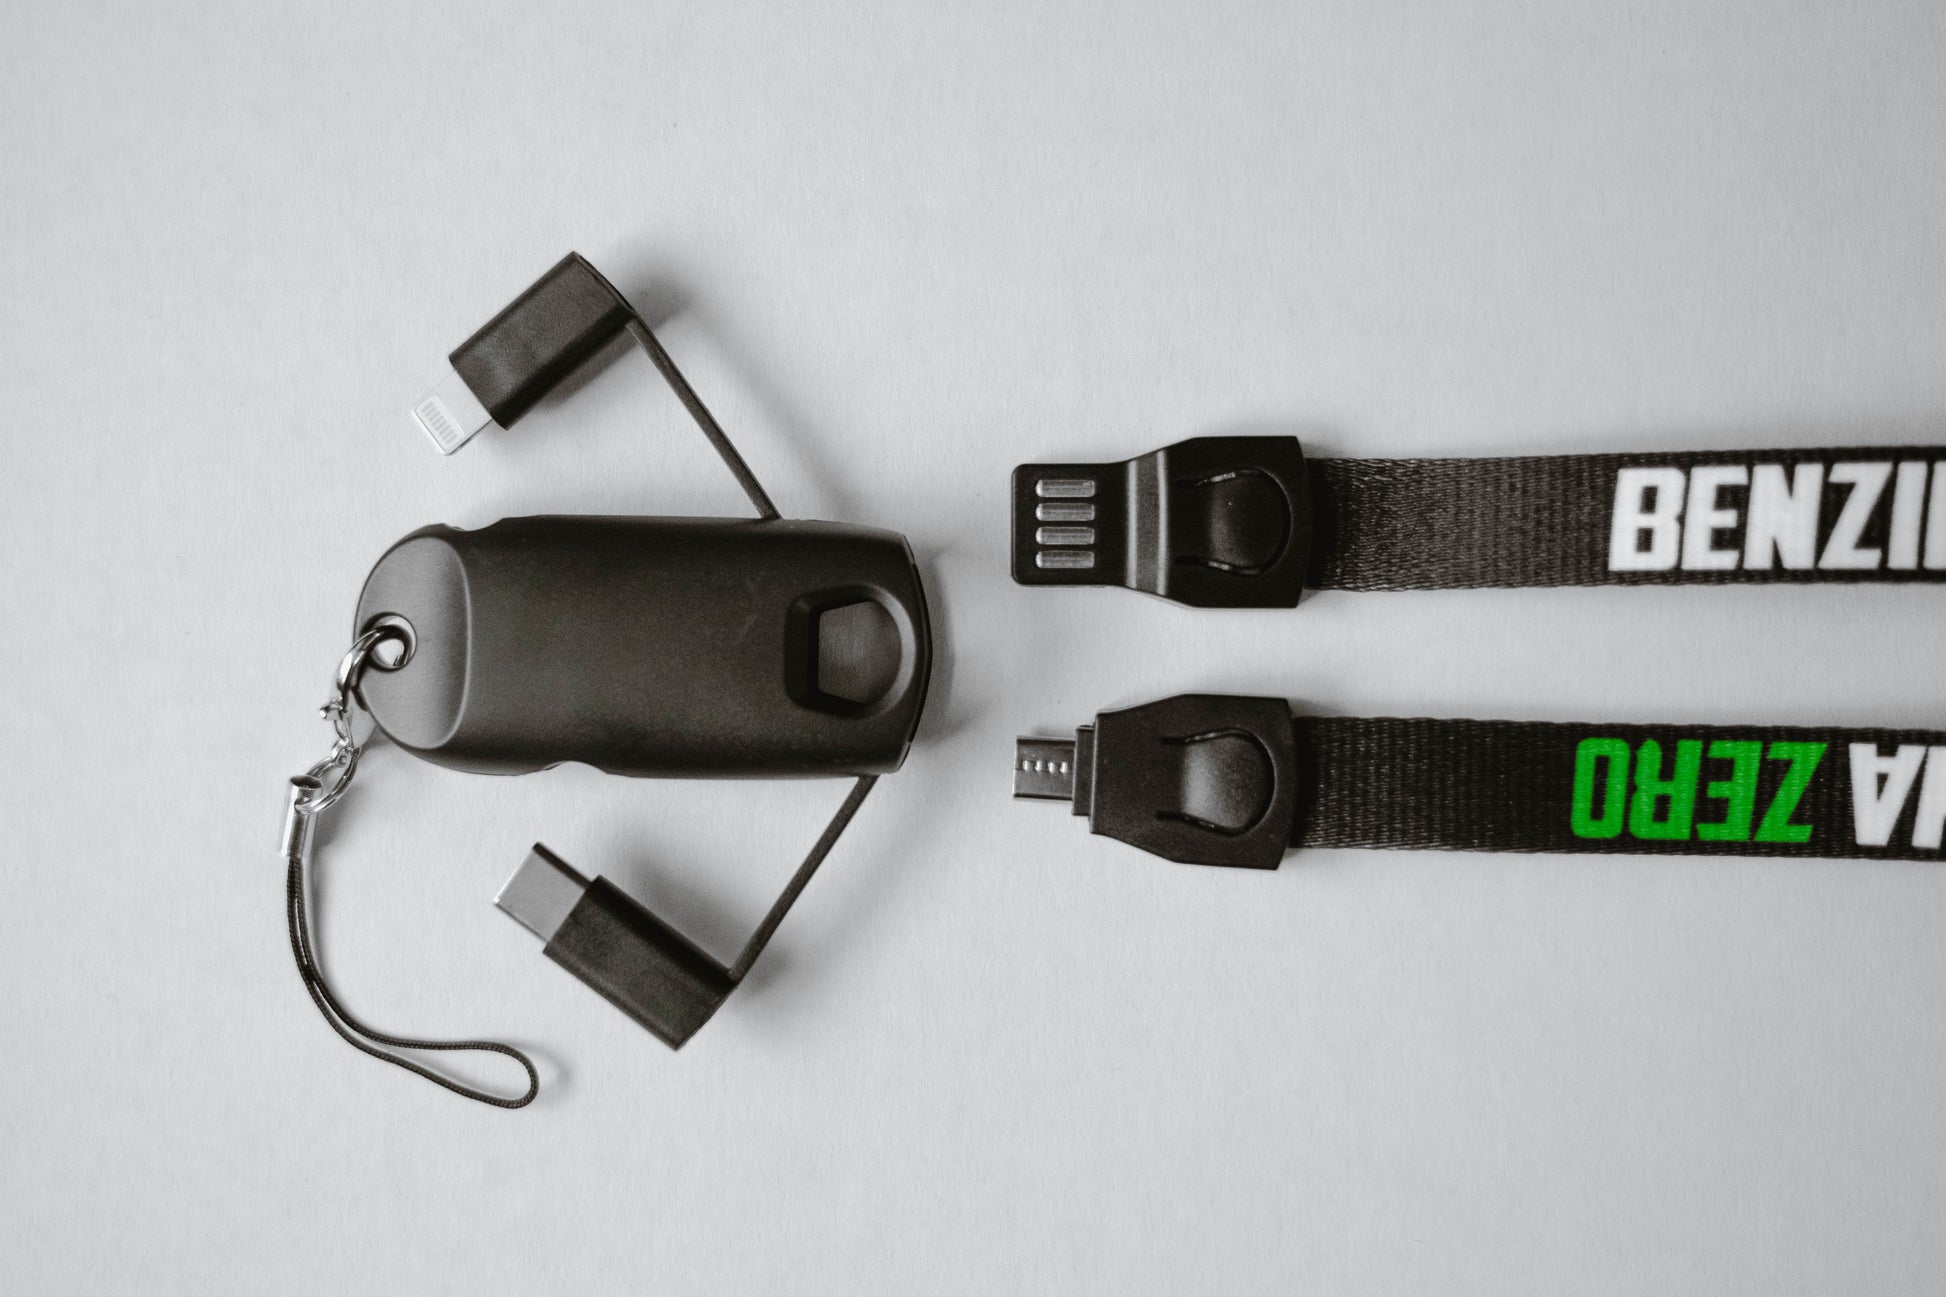 Benzina Zero lanyard keyring with hidden USB-A to Micro-USB/USB-C/Lighting-Cable for electric scooters.